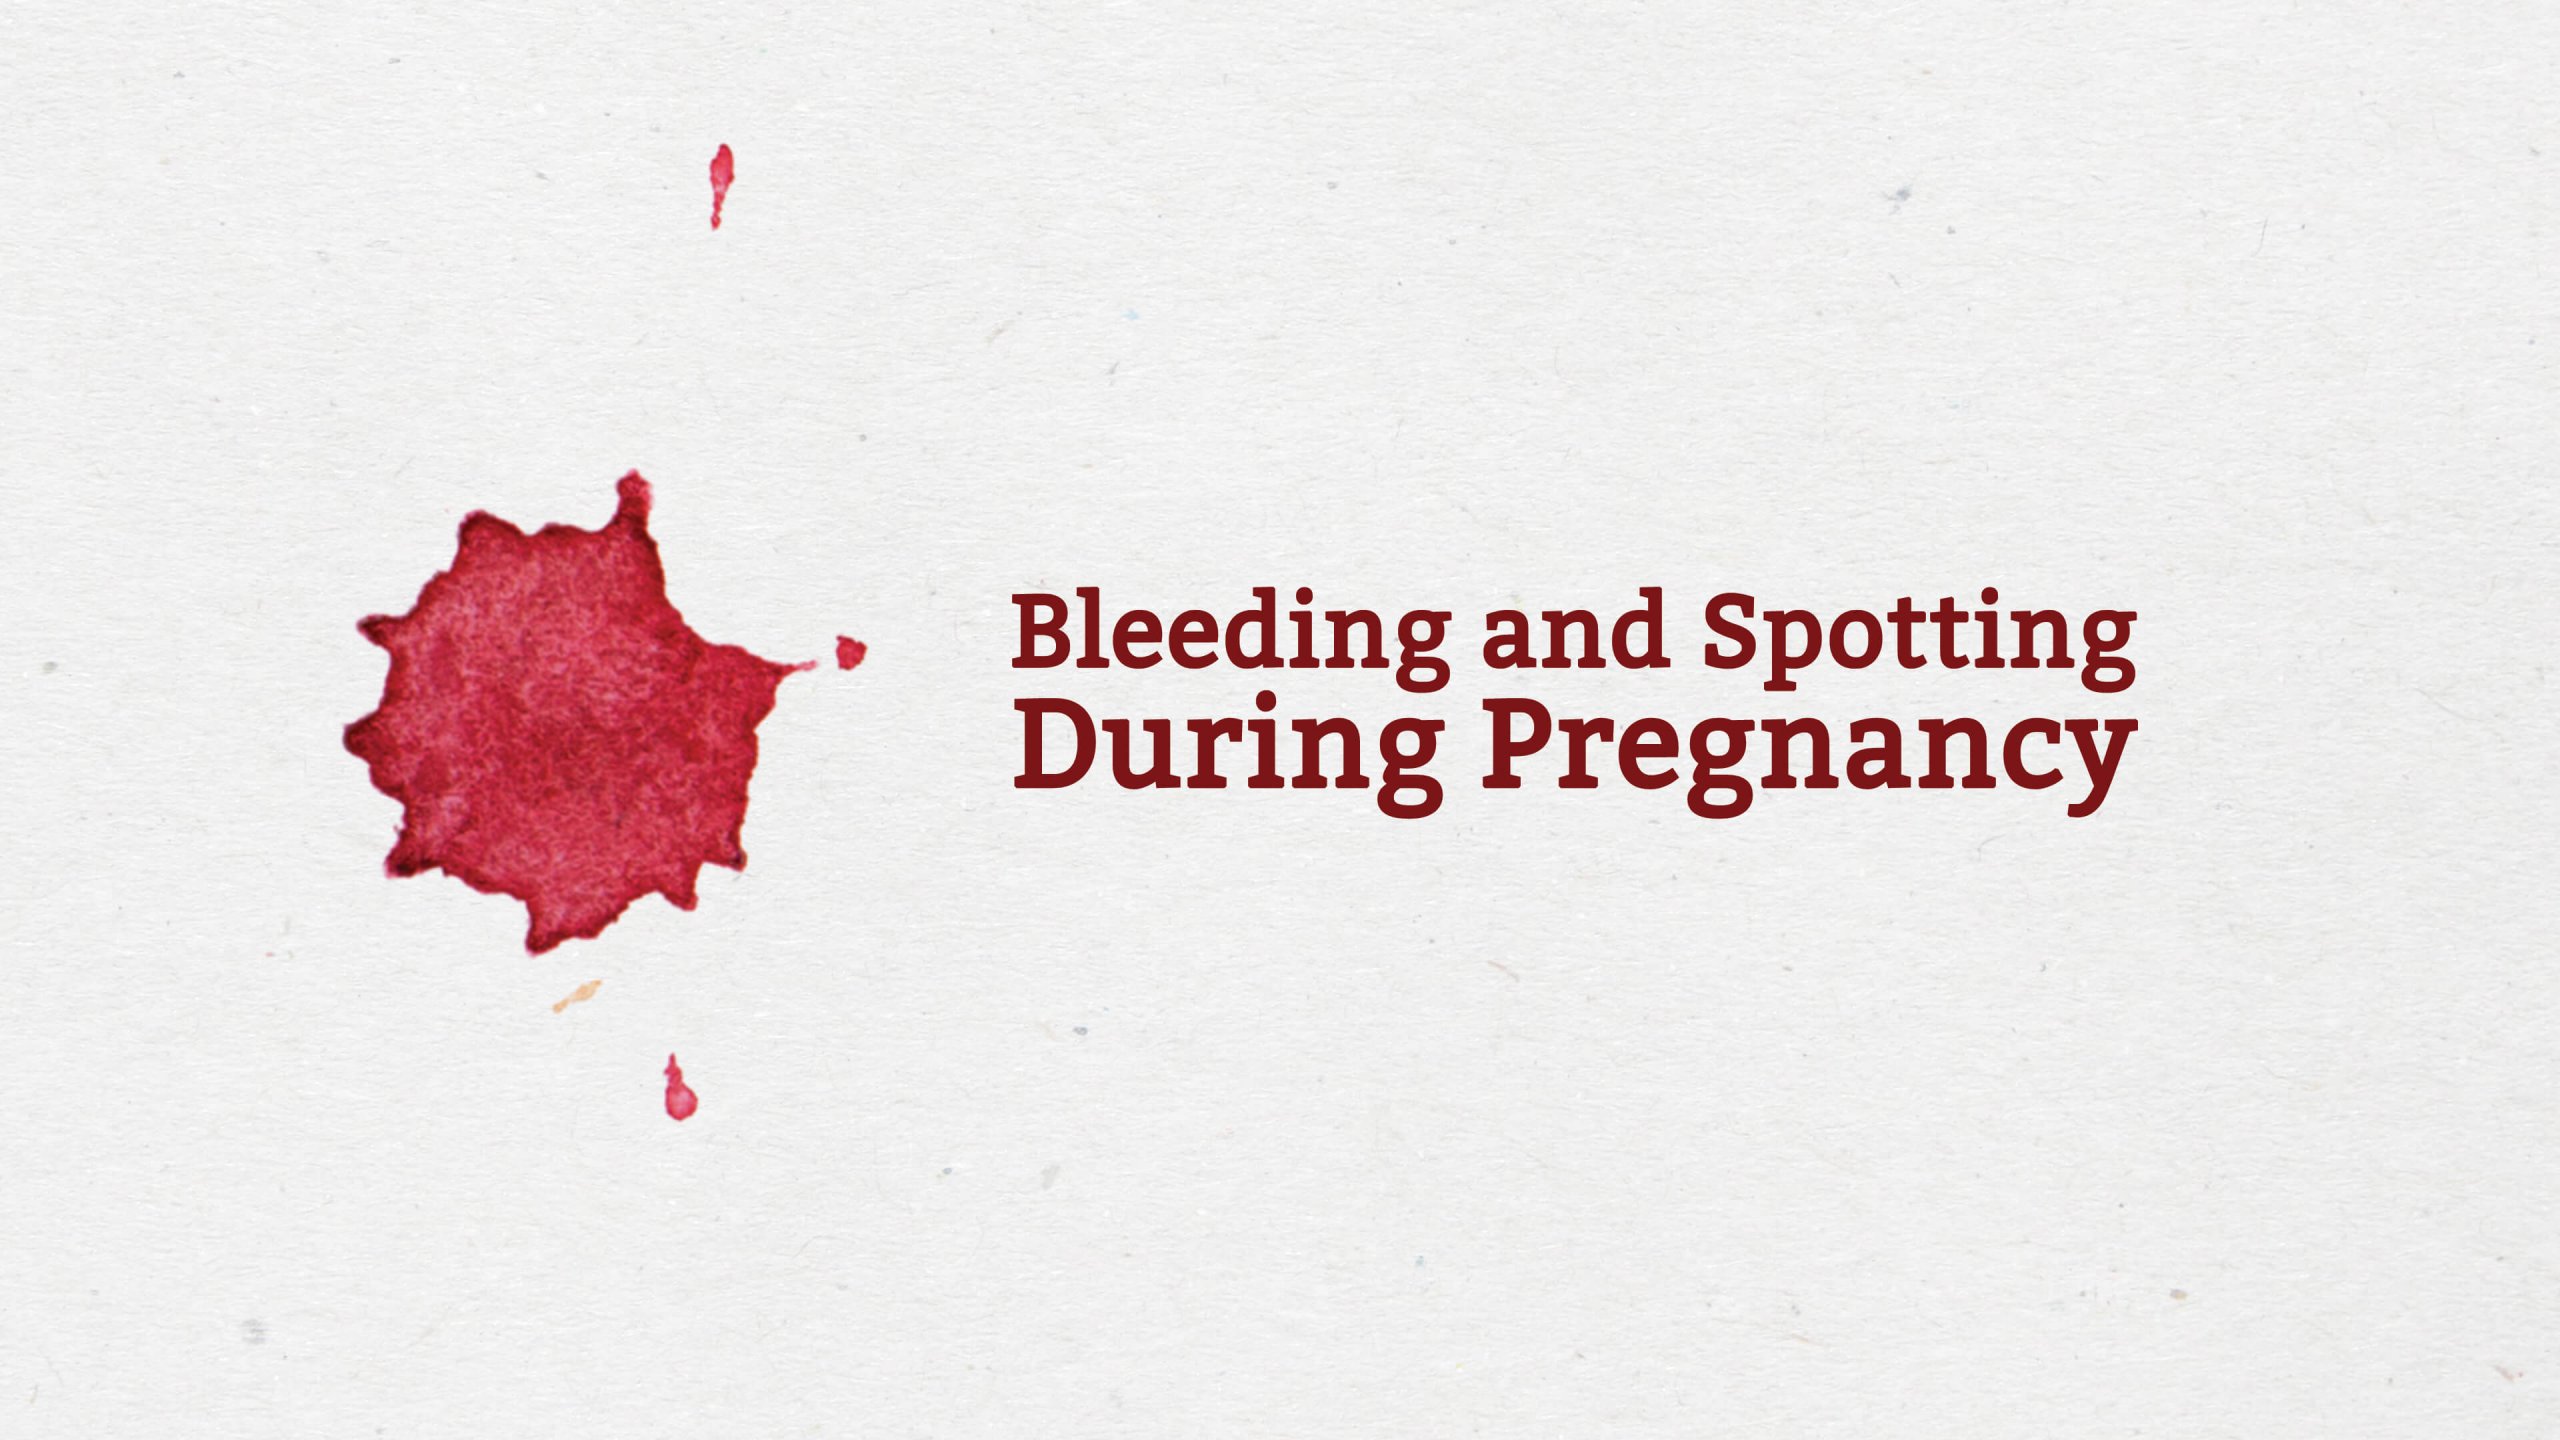 Not much causes more worry than bleeding during pregnancy. This guide to bleeding and spotting during pregnancy will explain and help give peace of mind.